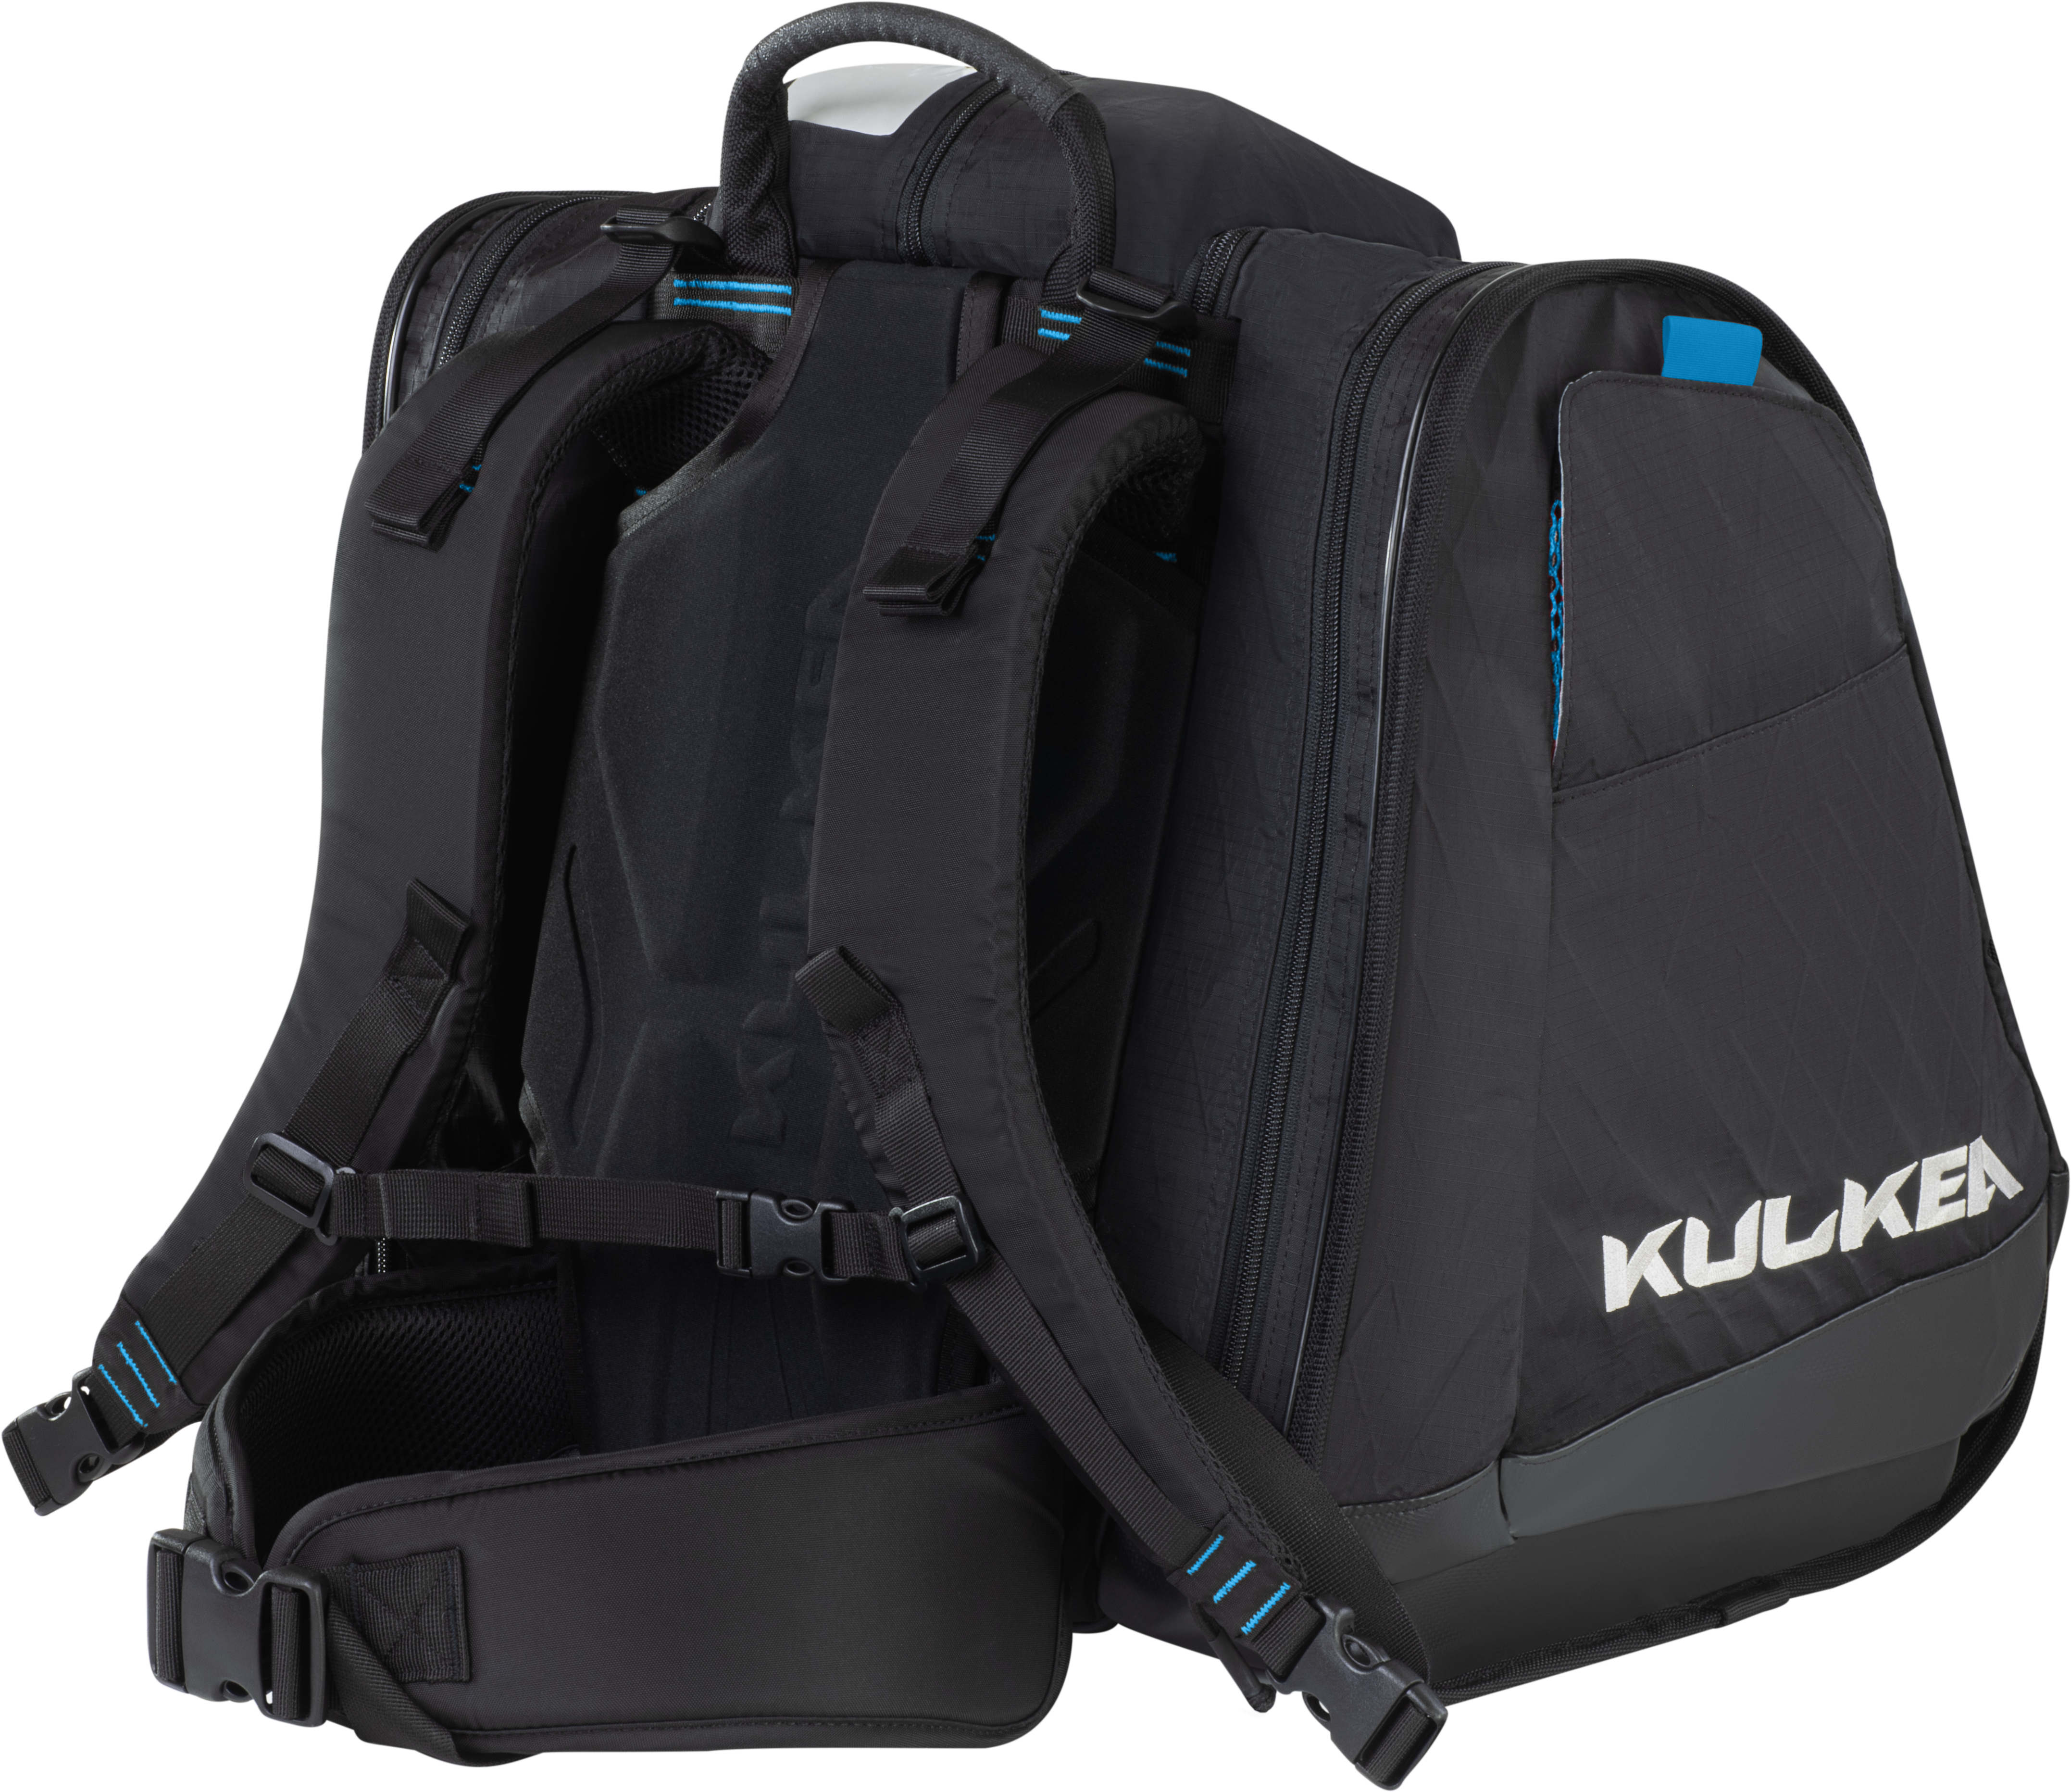 Kulkea boot bag in black with blue accents, tons of compartments, large enough to fit ski boots and most if not all your other ski gear including helmet.